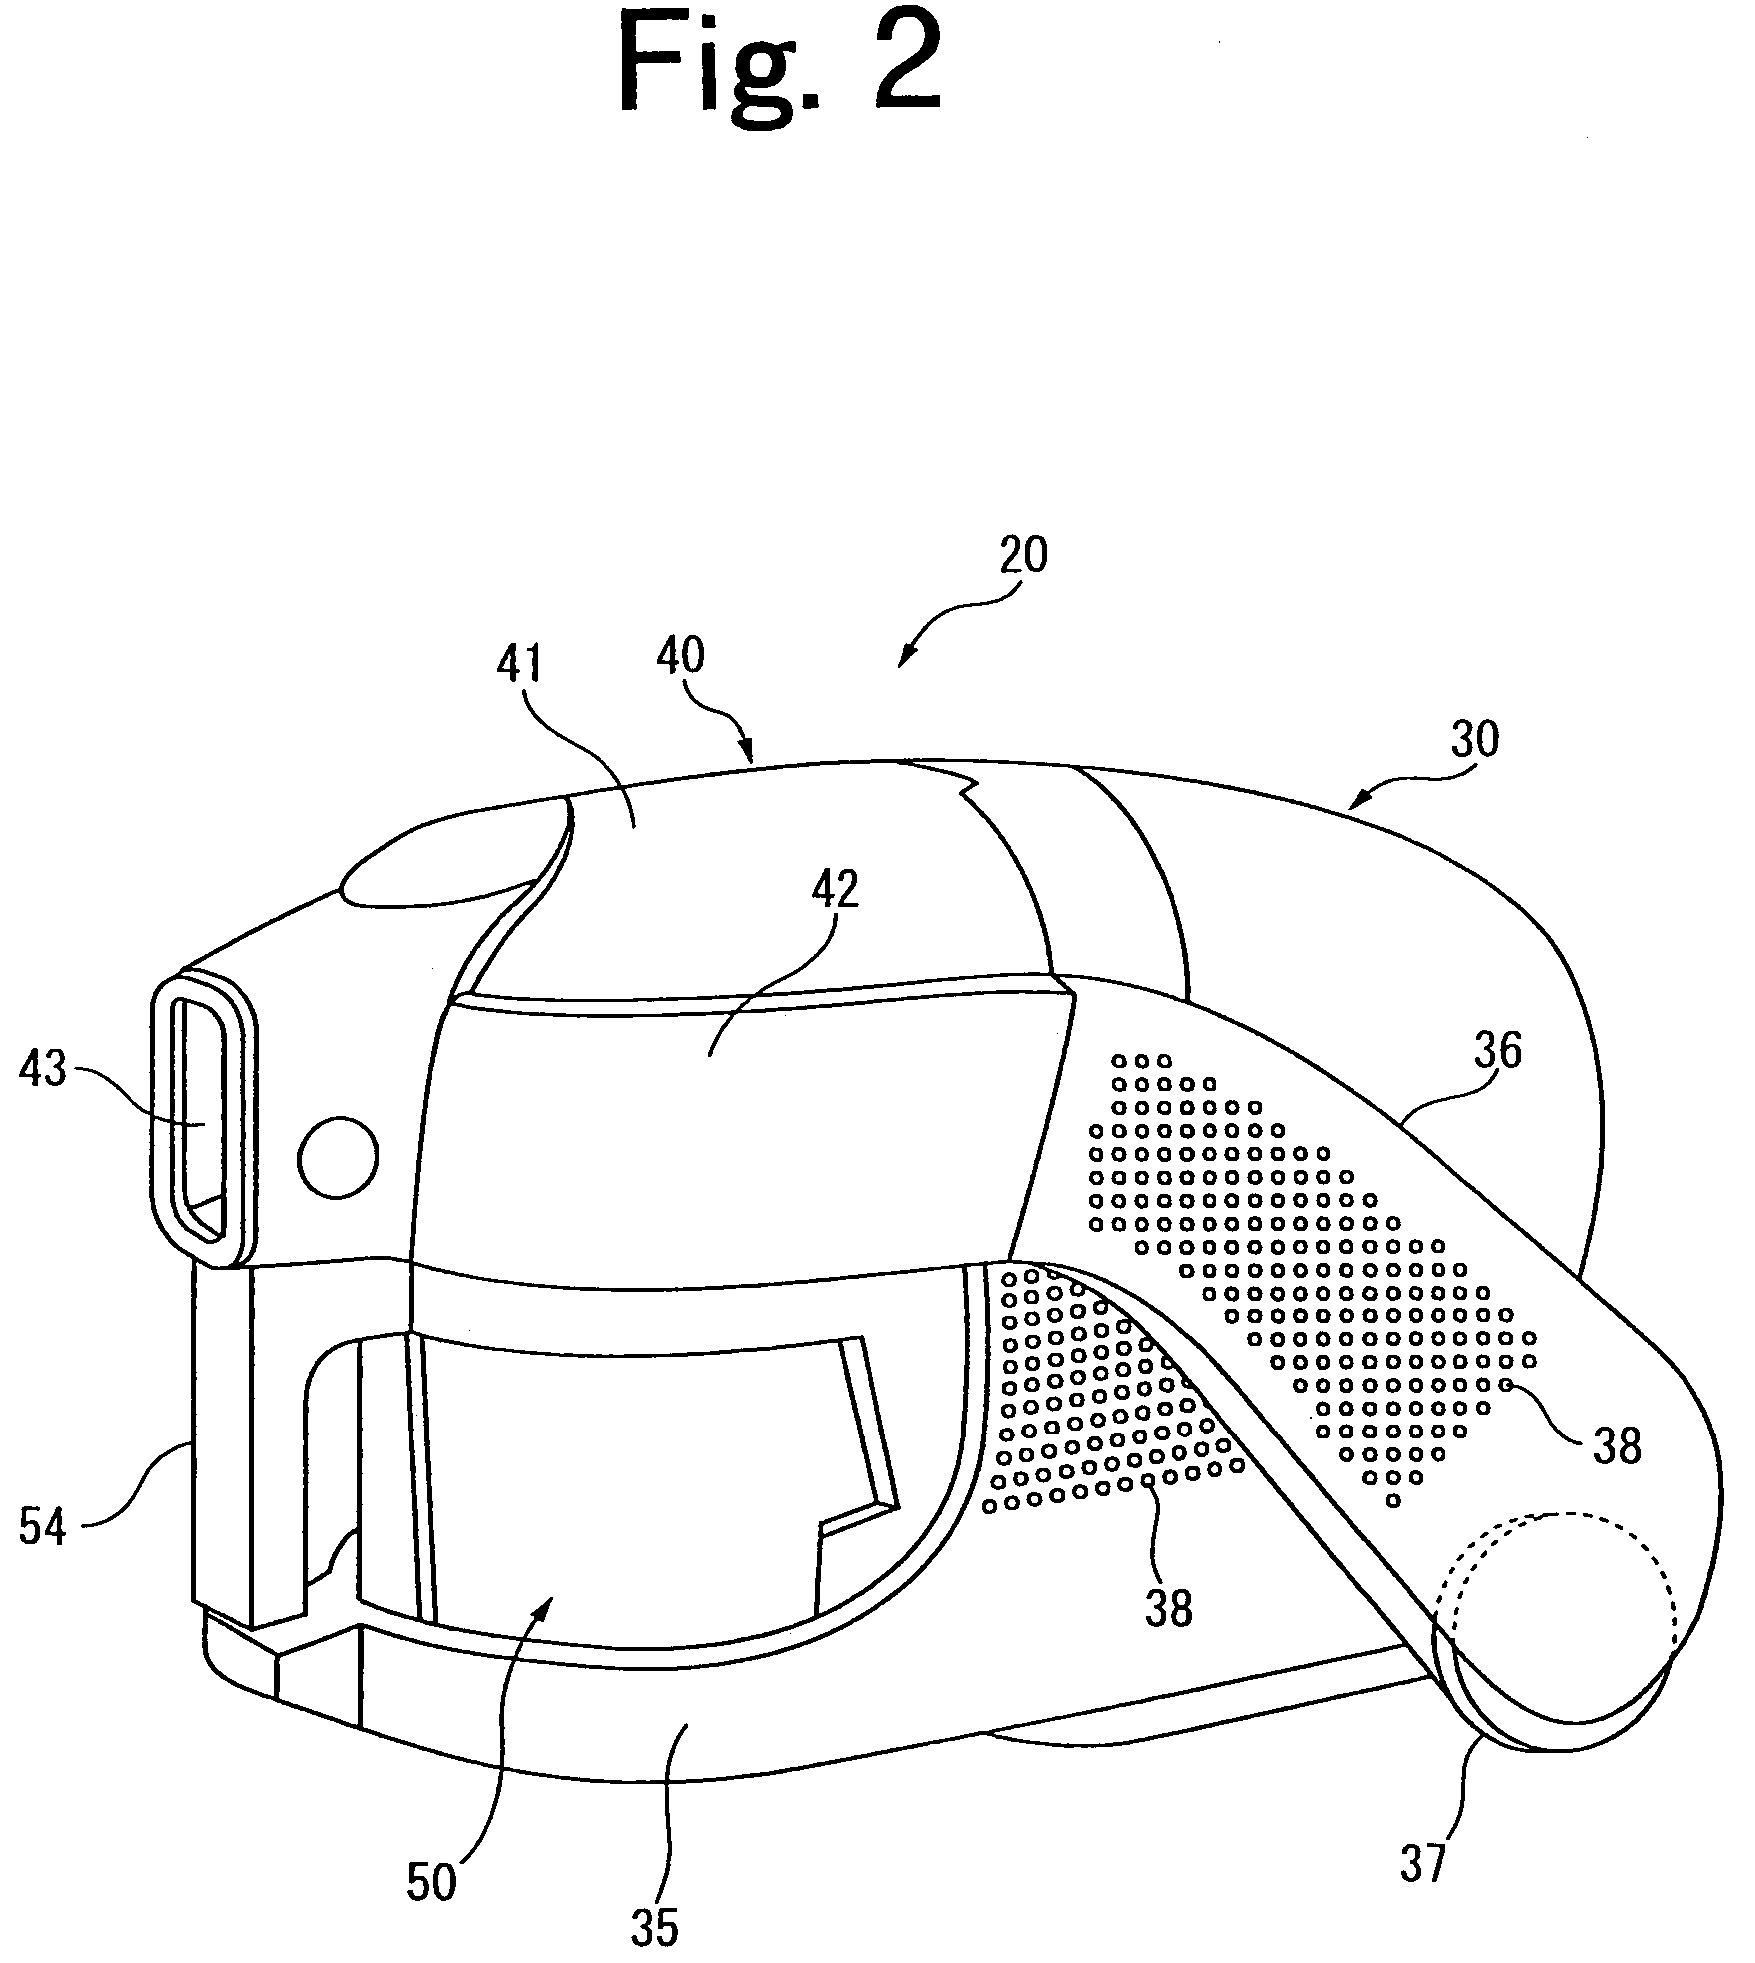 Electric vacuum cleaner provided with a dust separation section for separating sucked dust and dust collecting section for collecting the dust